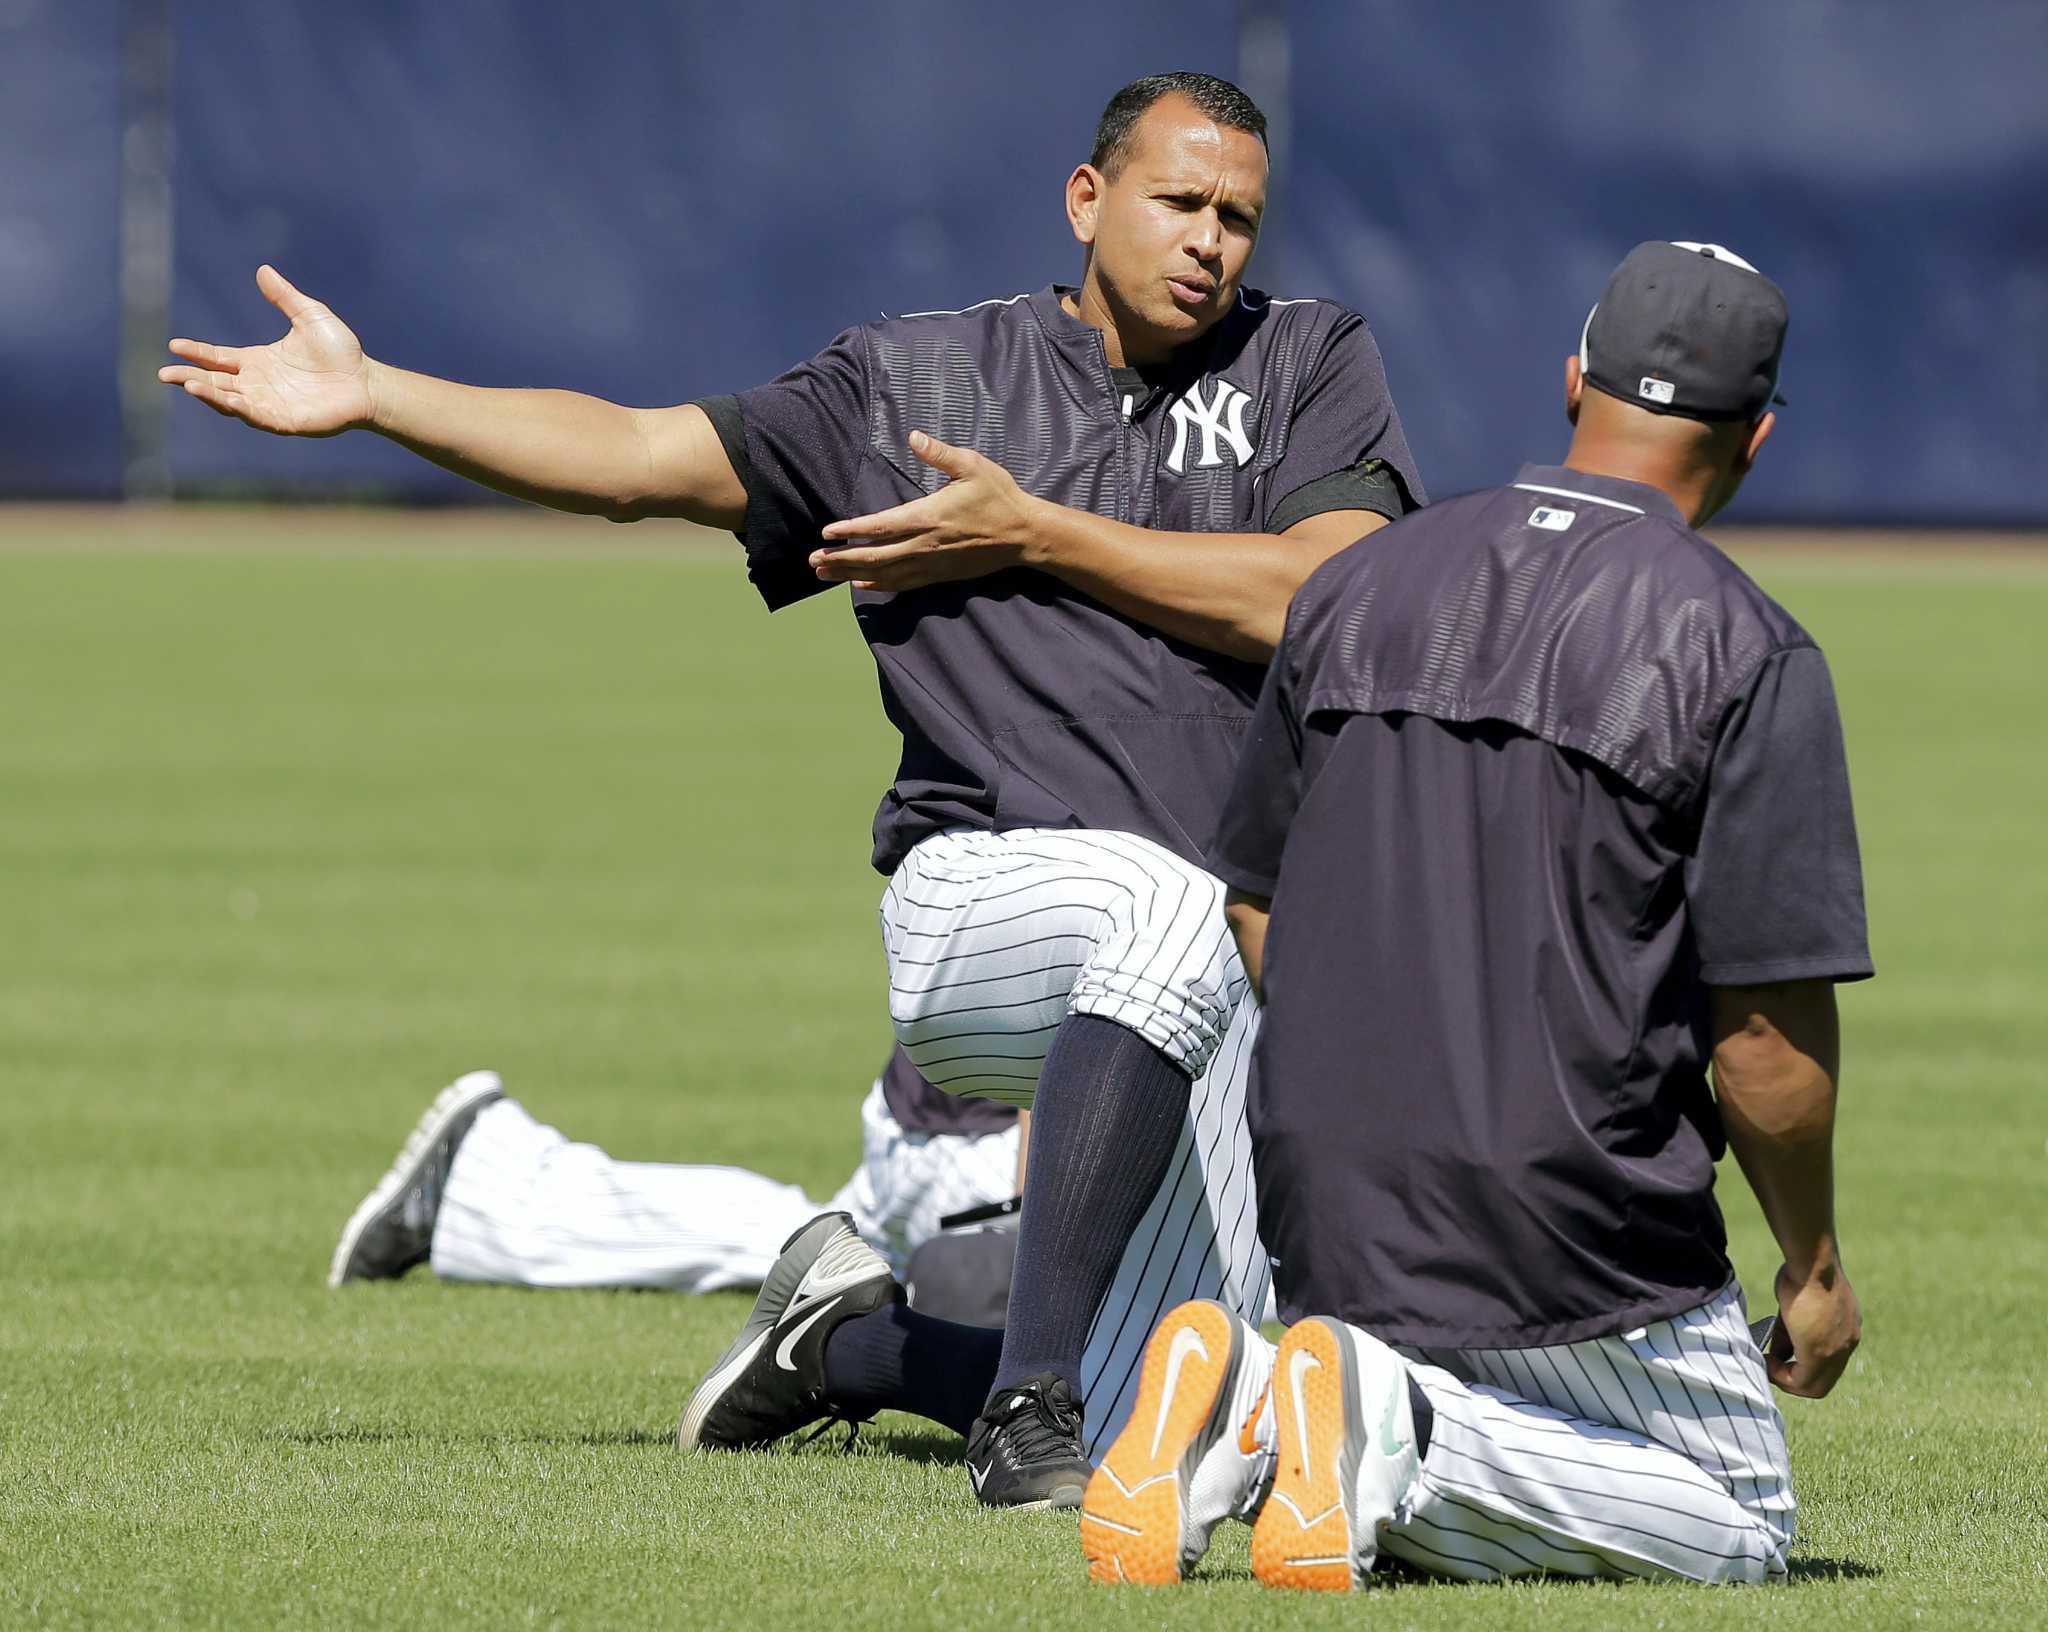 Yankees-Mets Game 2: Three takeaways from the Subway series, from